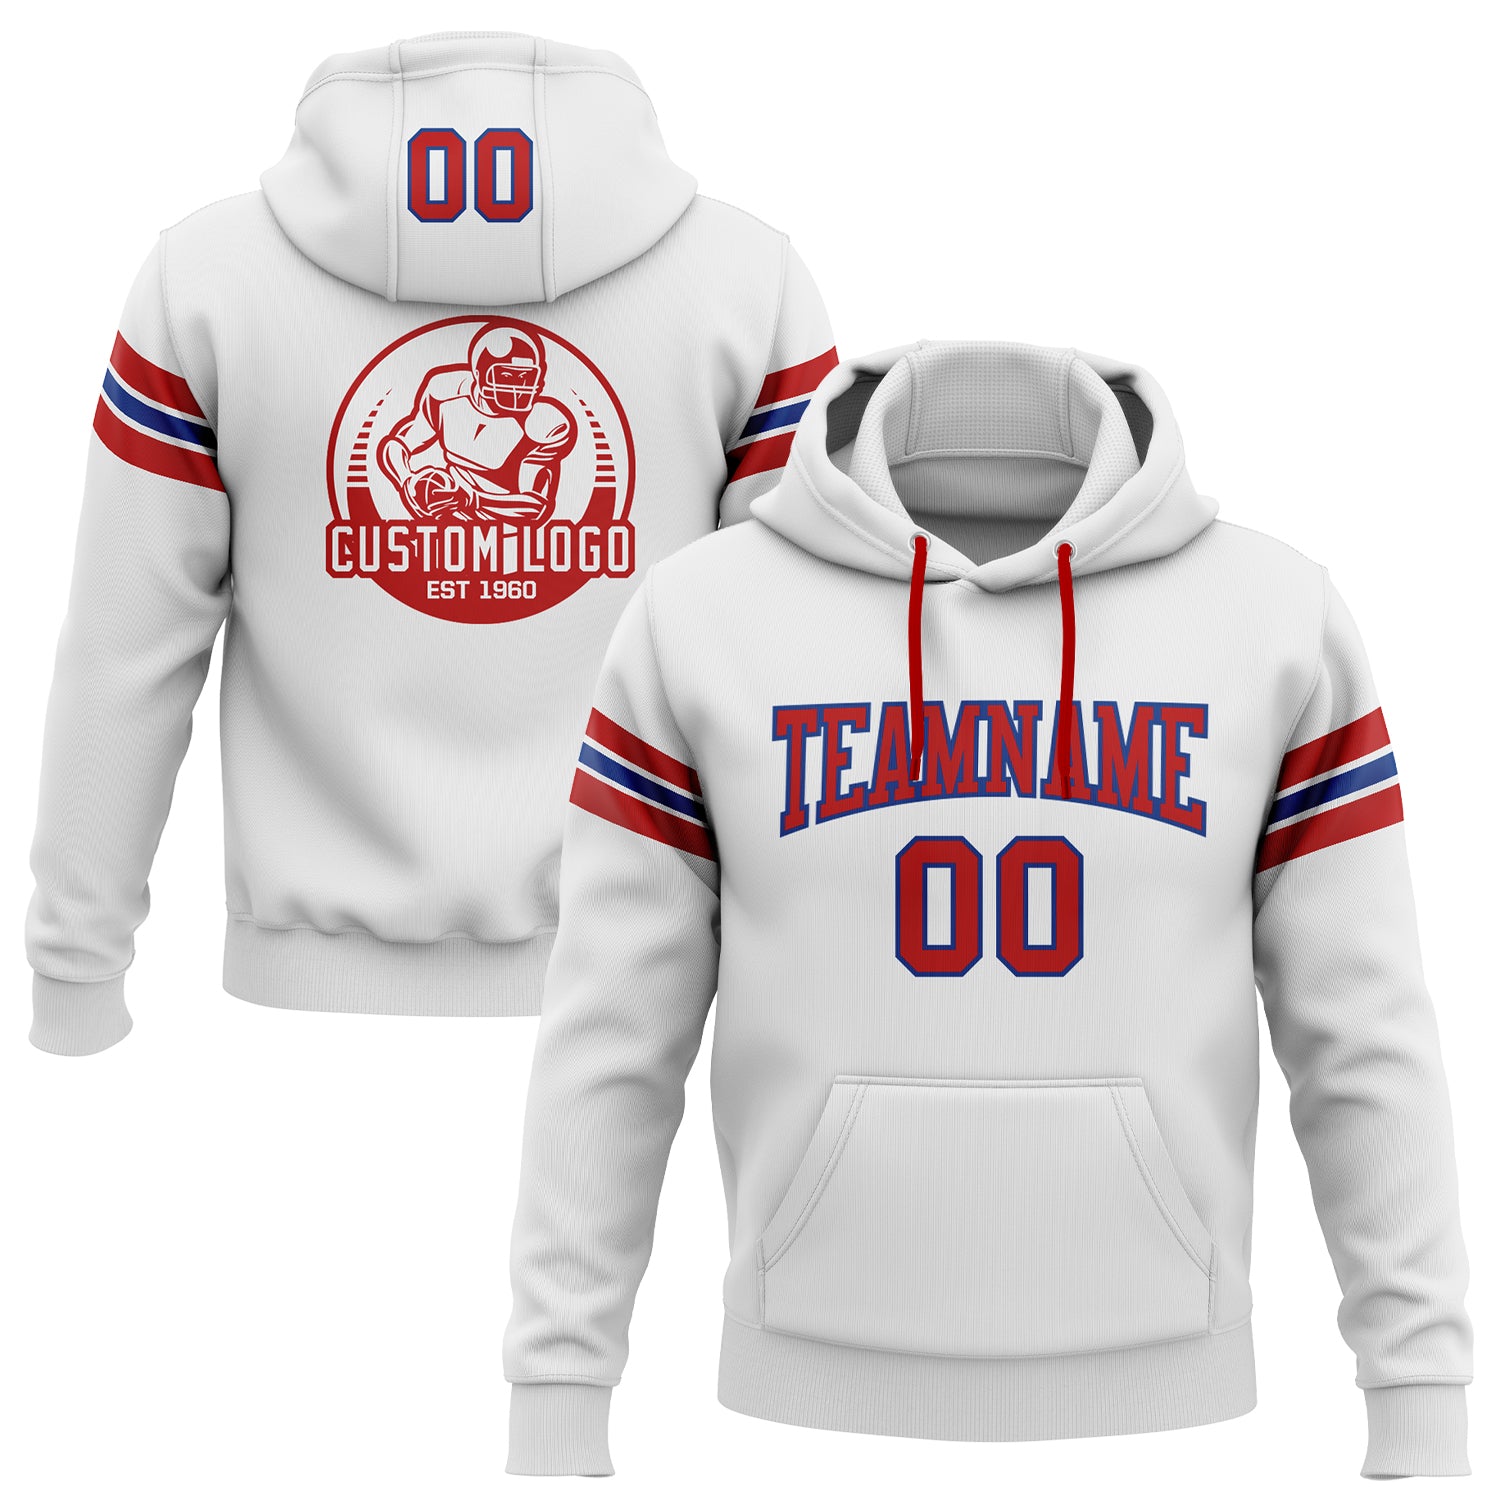 FANSIDEA Custom Stitched White Red-Royal Football Pullover Sweatshirt Hoodie Men's Size:2XL